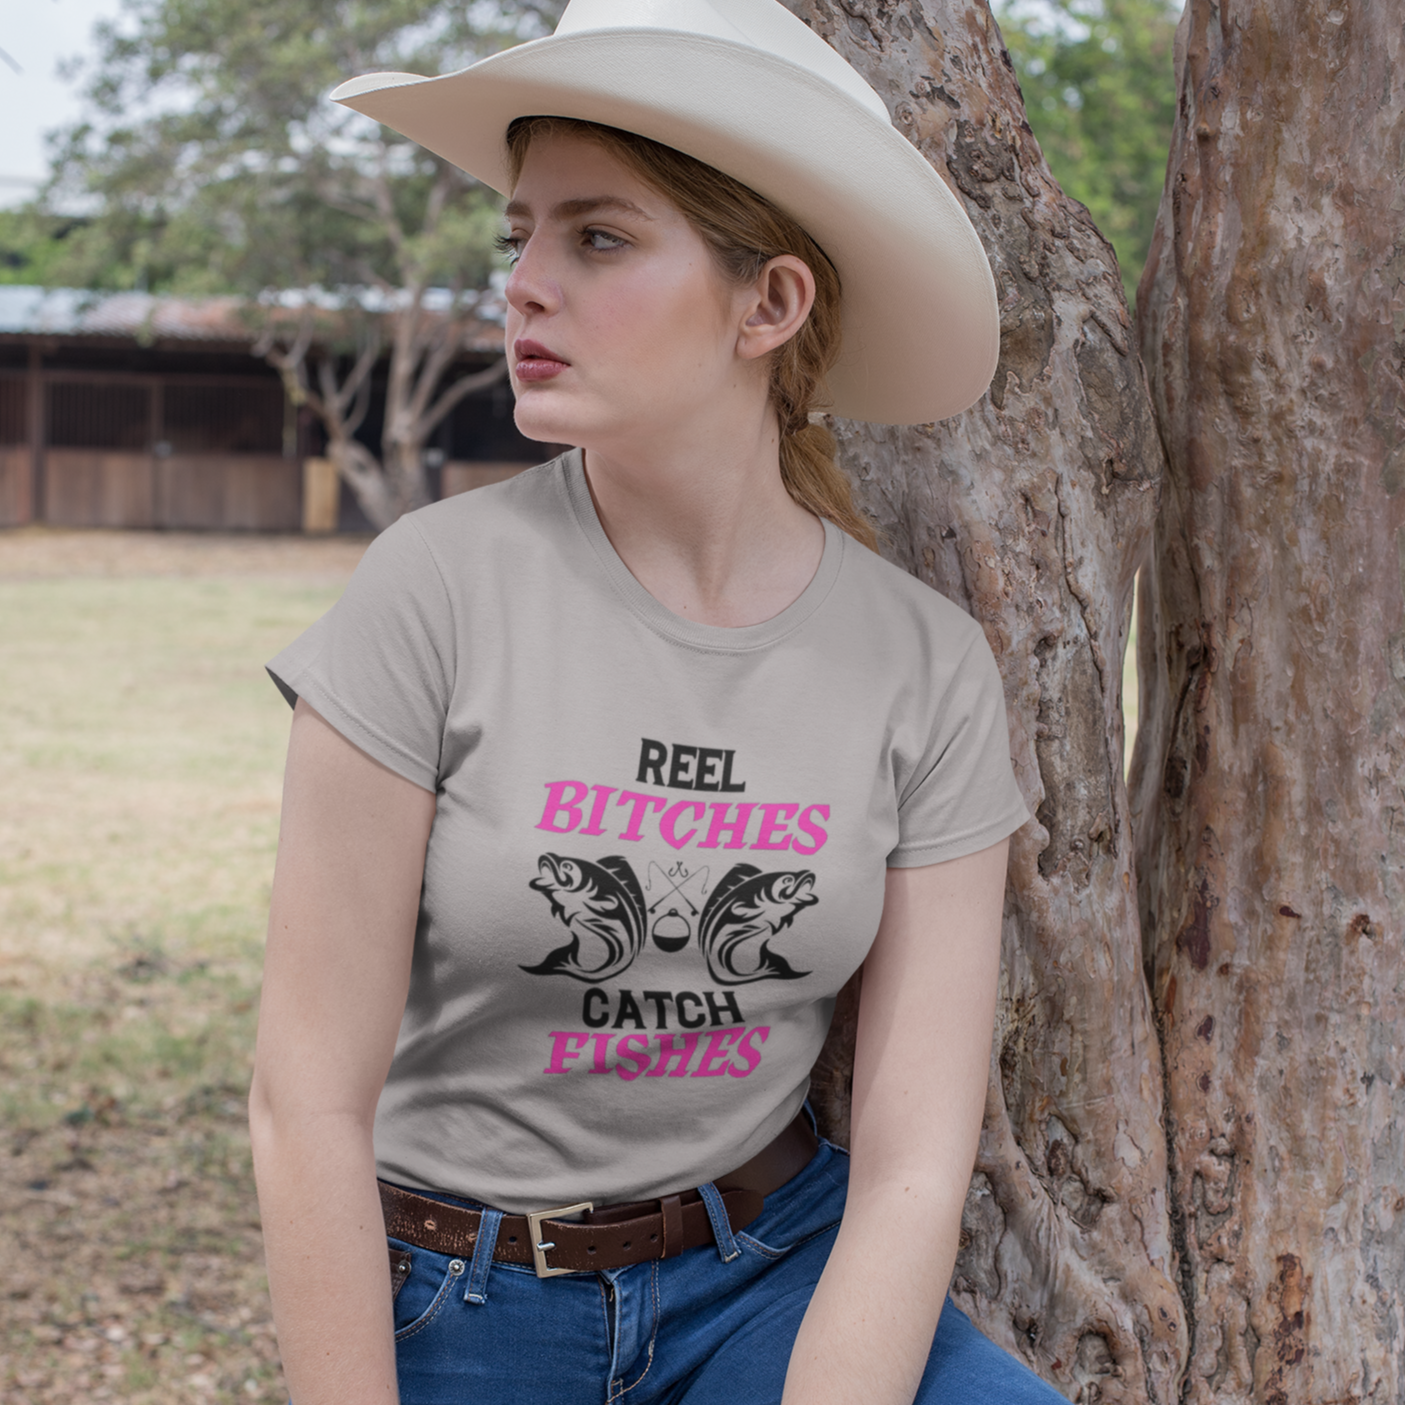 real-bitches-catch-fishes-athletic-heather-t-shirt-fishing-mockup-featuring-a-country-woman-wearing-a-crewneck-t-shirt-outdoors